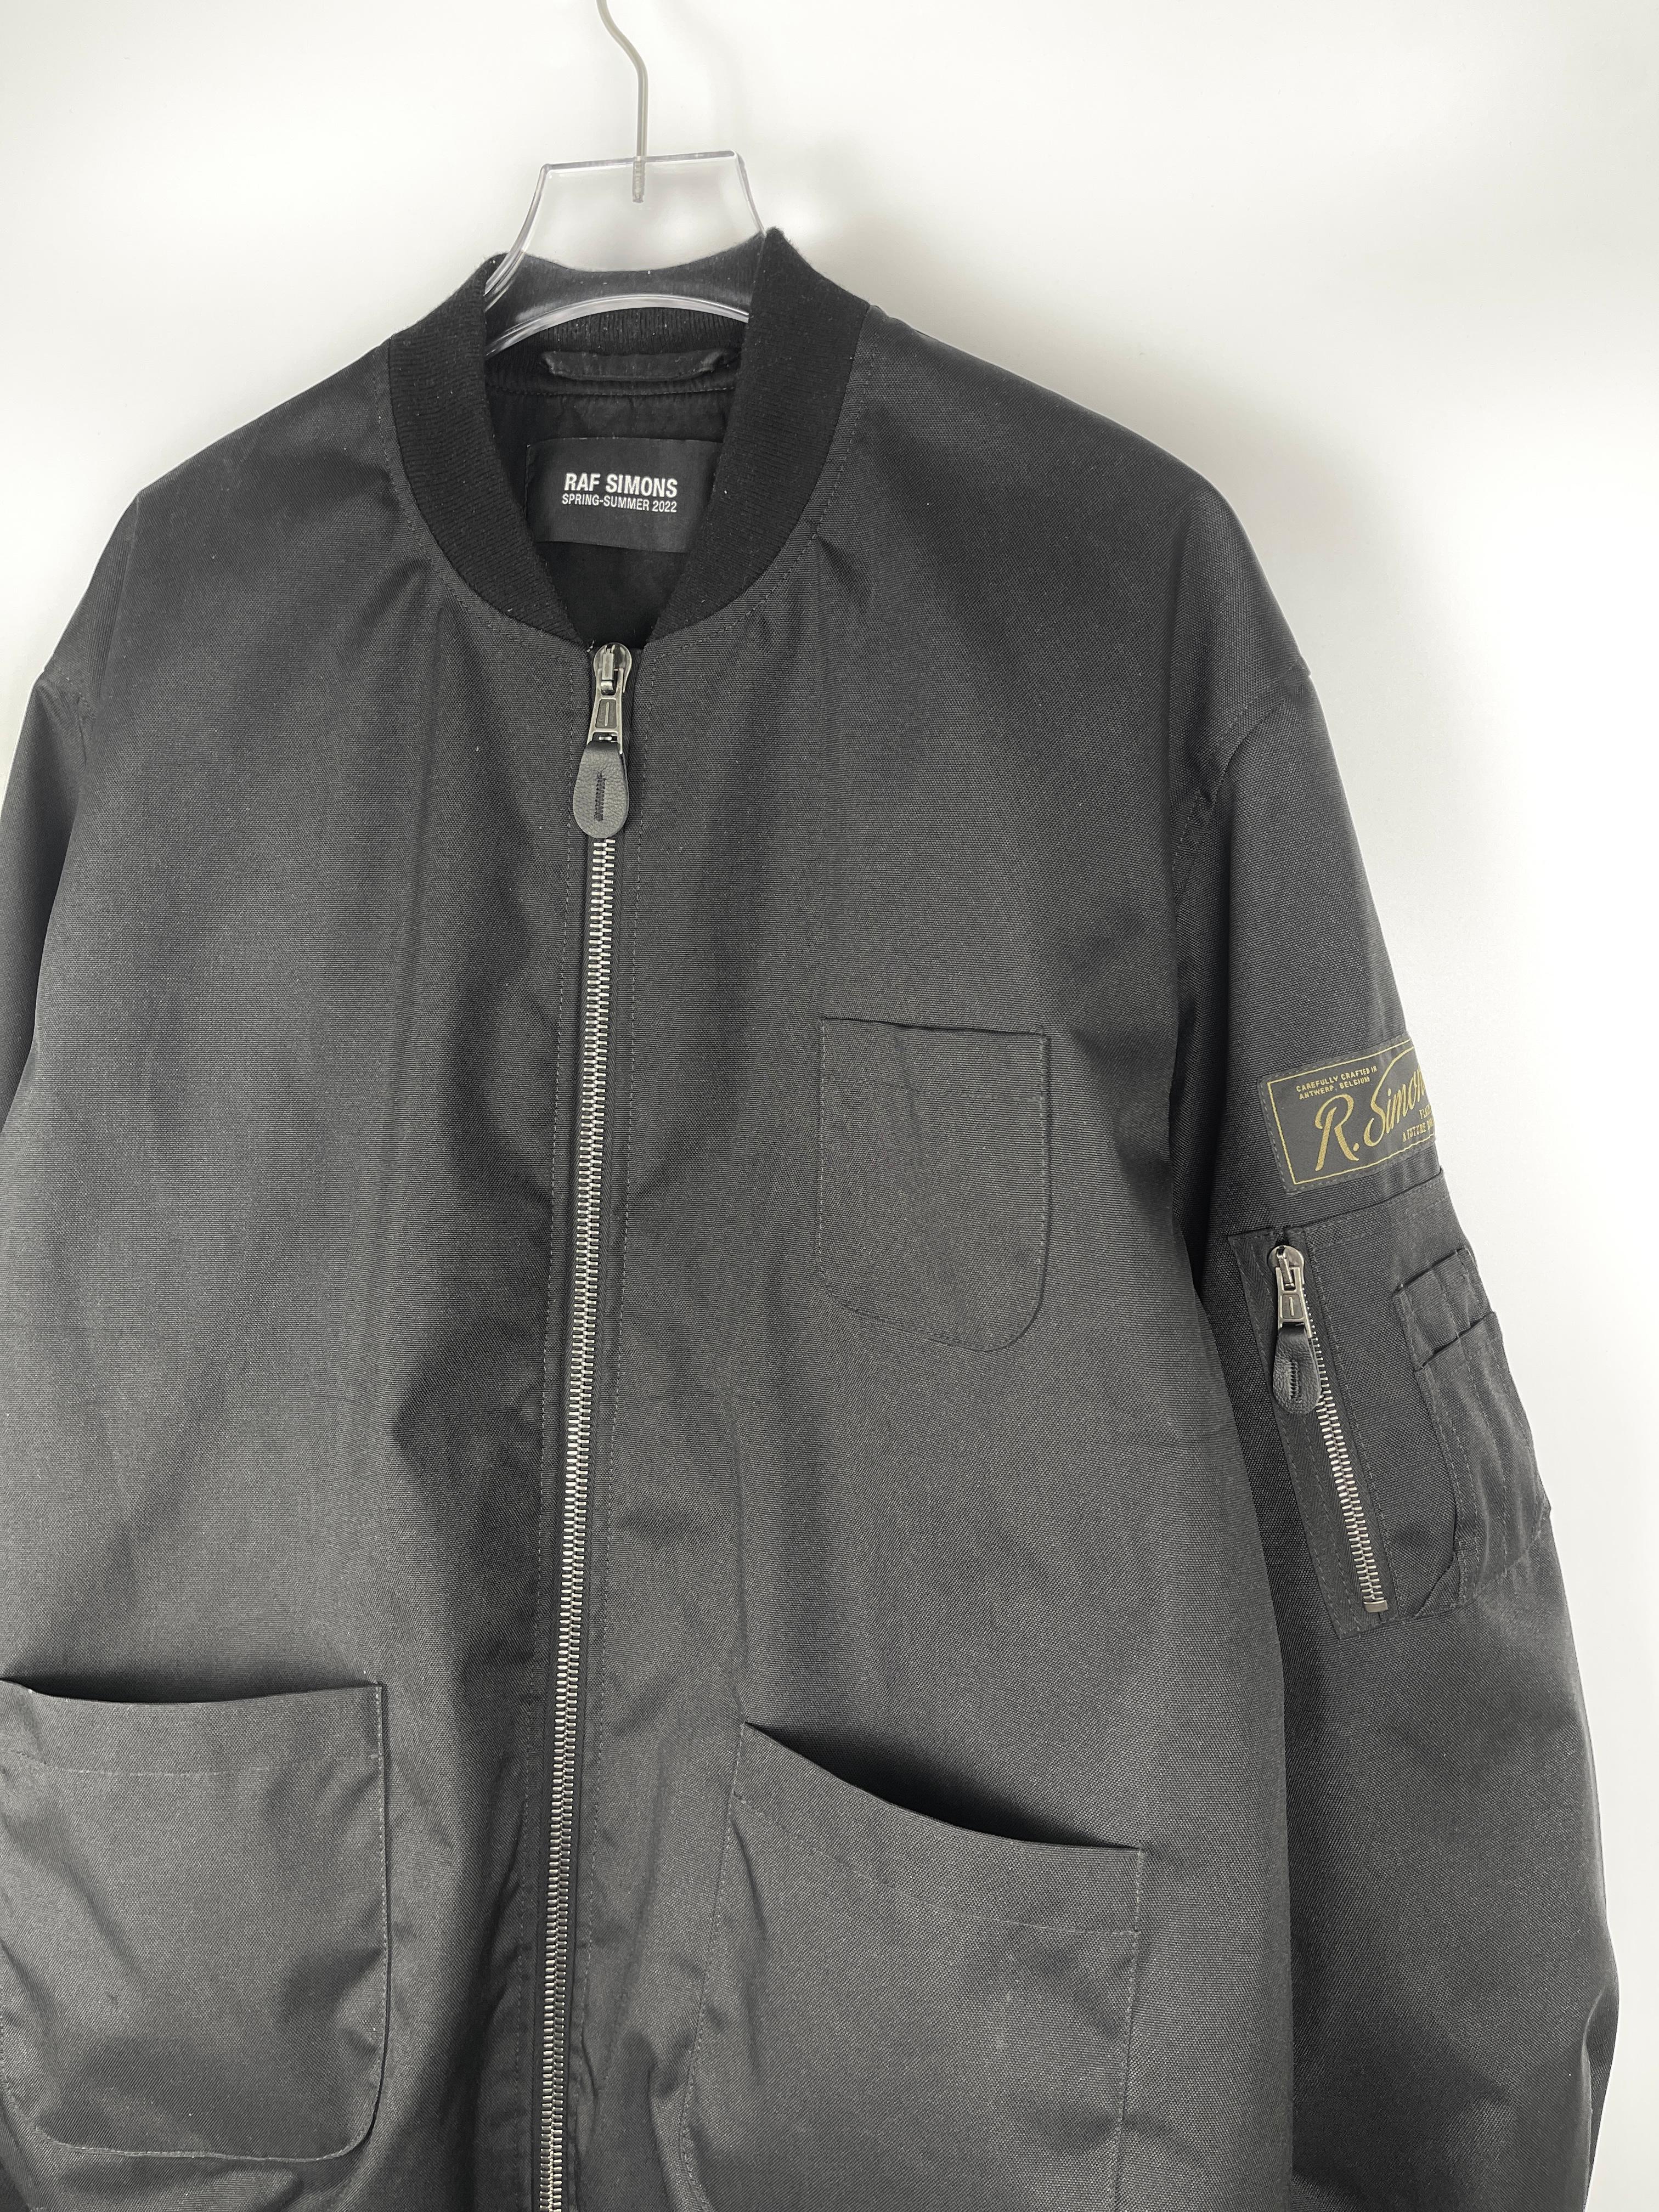 Raf Simons S/S2022 Uniform Bomber Jacket  In Excellent Condition For Sale In Seattle, WA